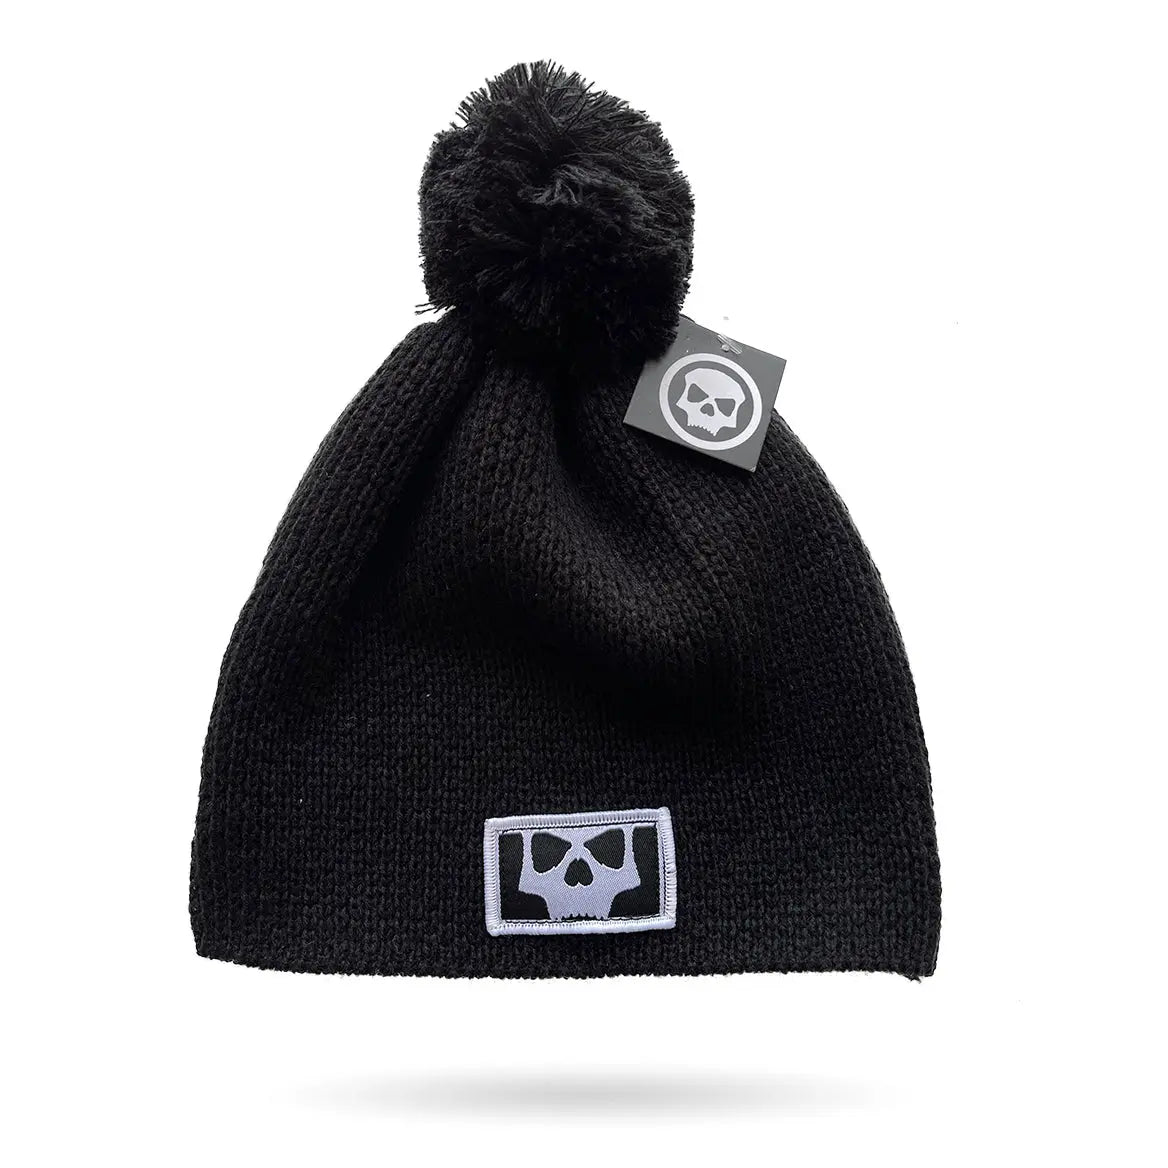 Infamous Knit Beanie - Skull Icon